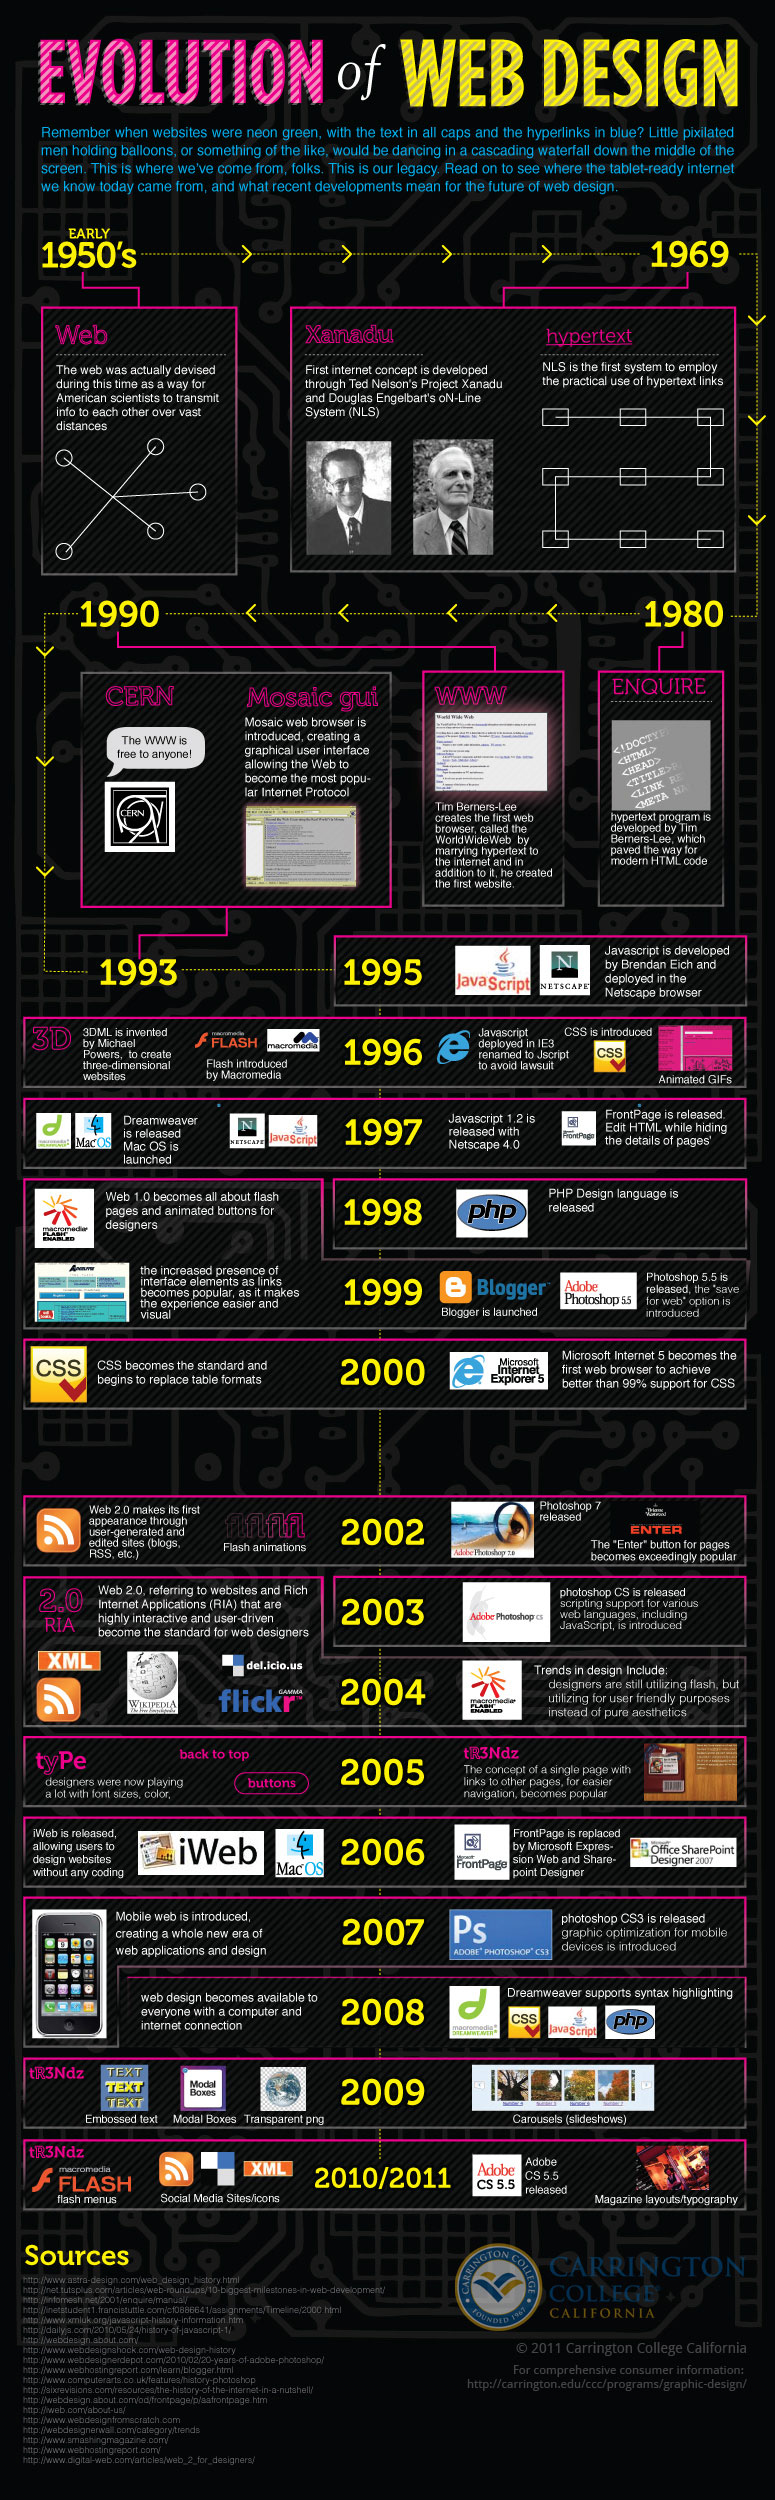 Design Evolution On The Web Explained [Infographic]